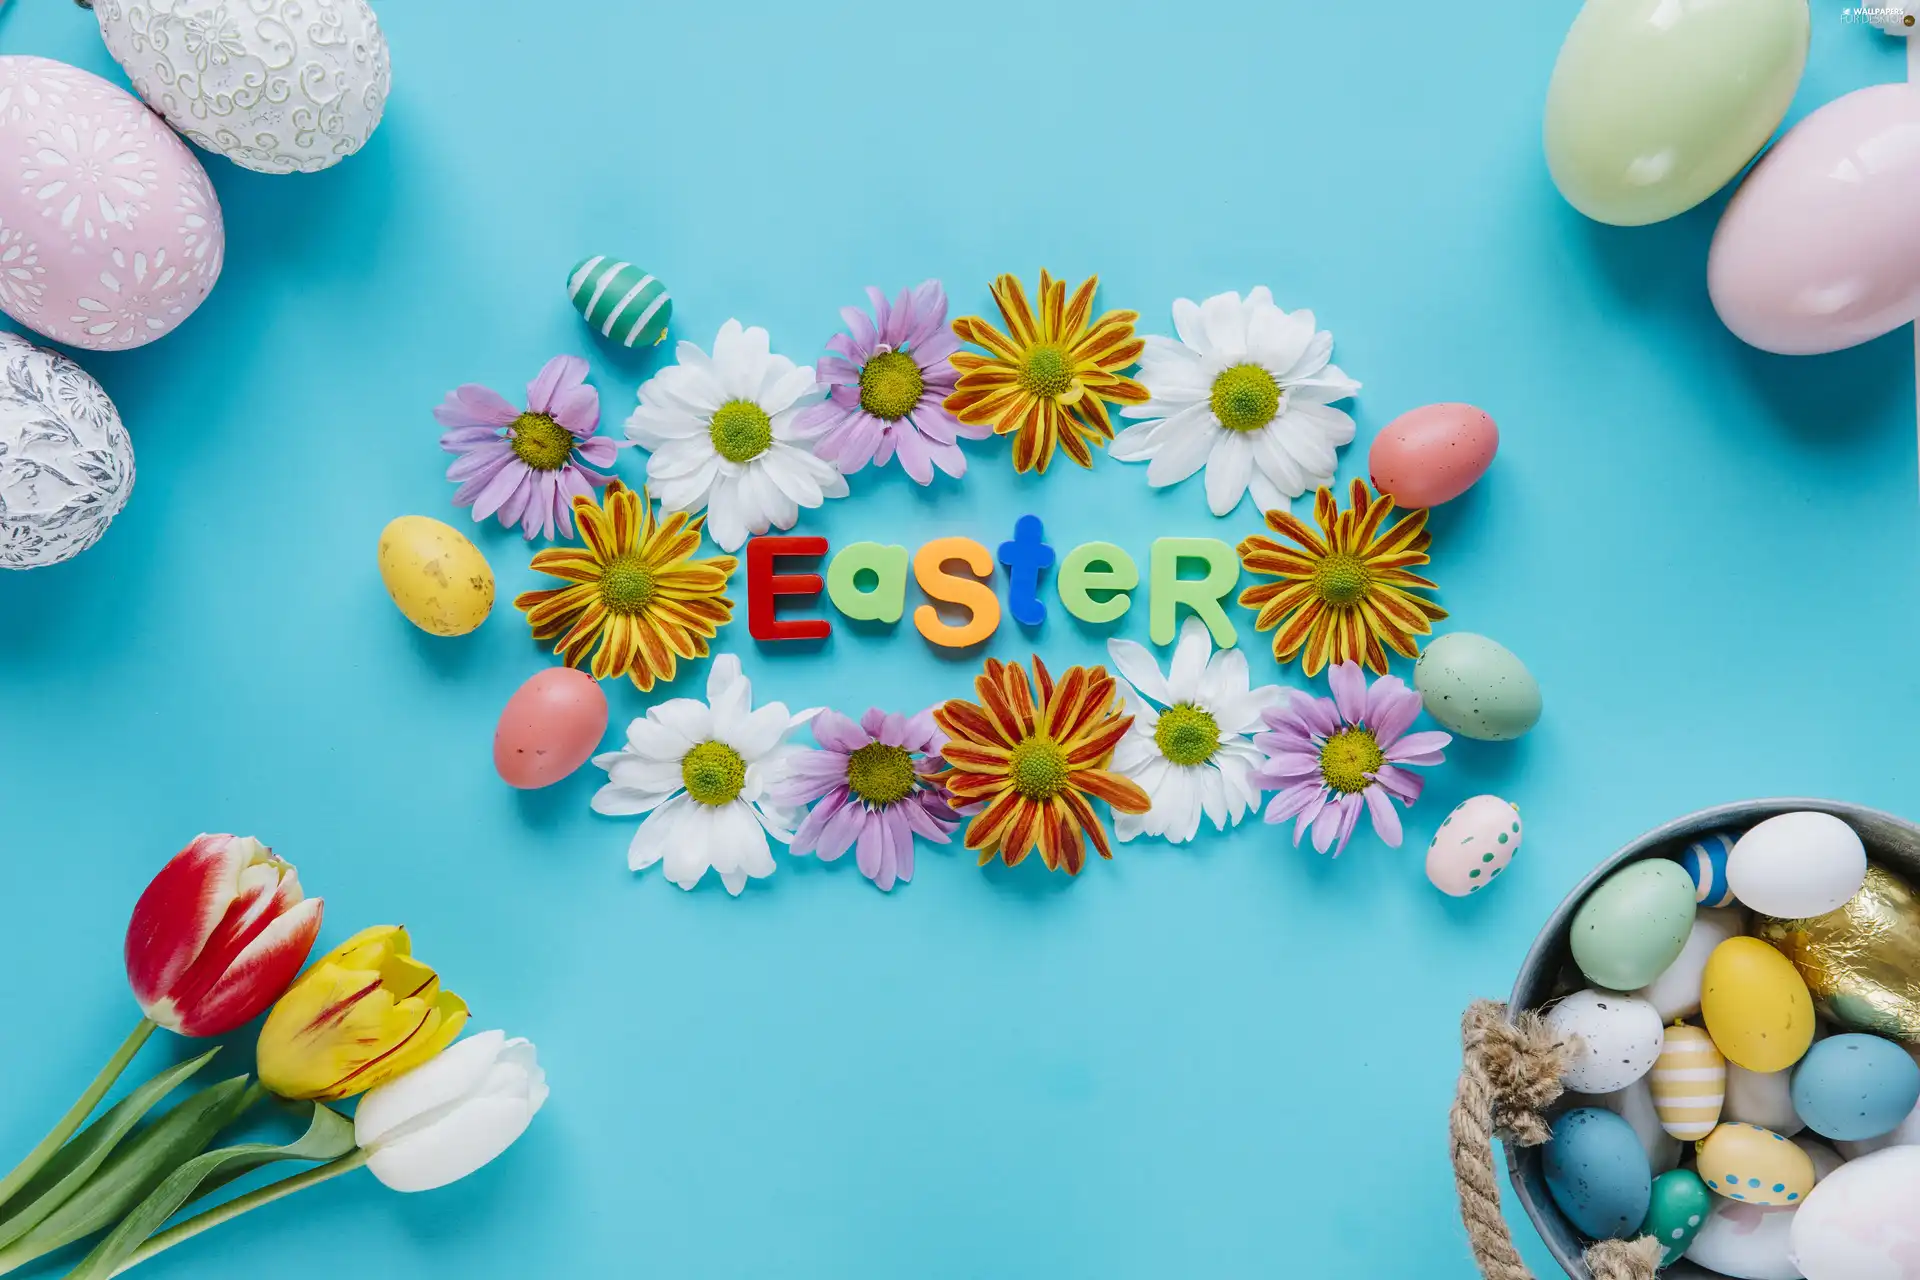 text, Tulips, eggs, Blue, Bucket, Flowers, color, background, Easter, Flowers